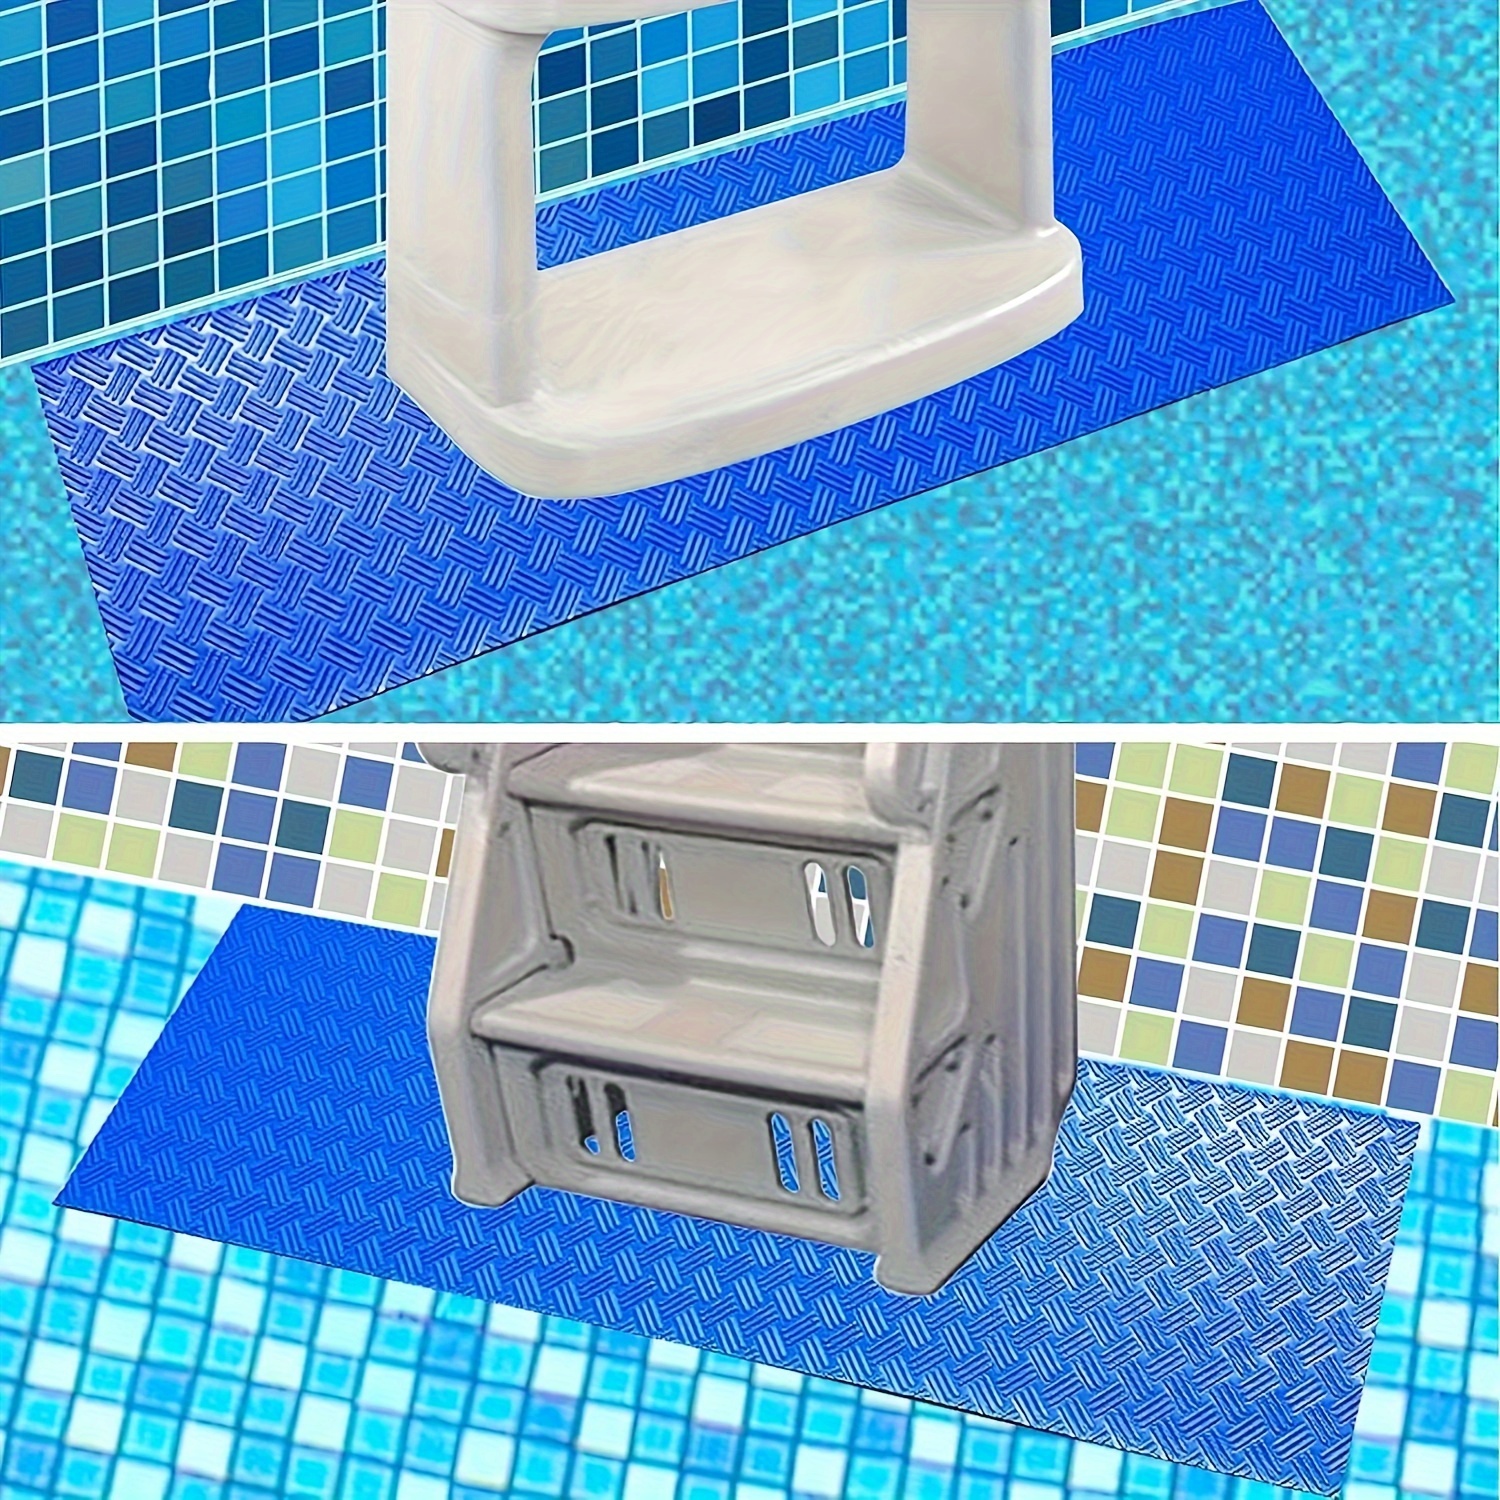 

[blue Safety] Durable Pvc Swimming Pool Ladder Mat - Non-slip, Protective Surface Pad In Blue, Available In 9x24", 9x36", And 36x36" Sizes